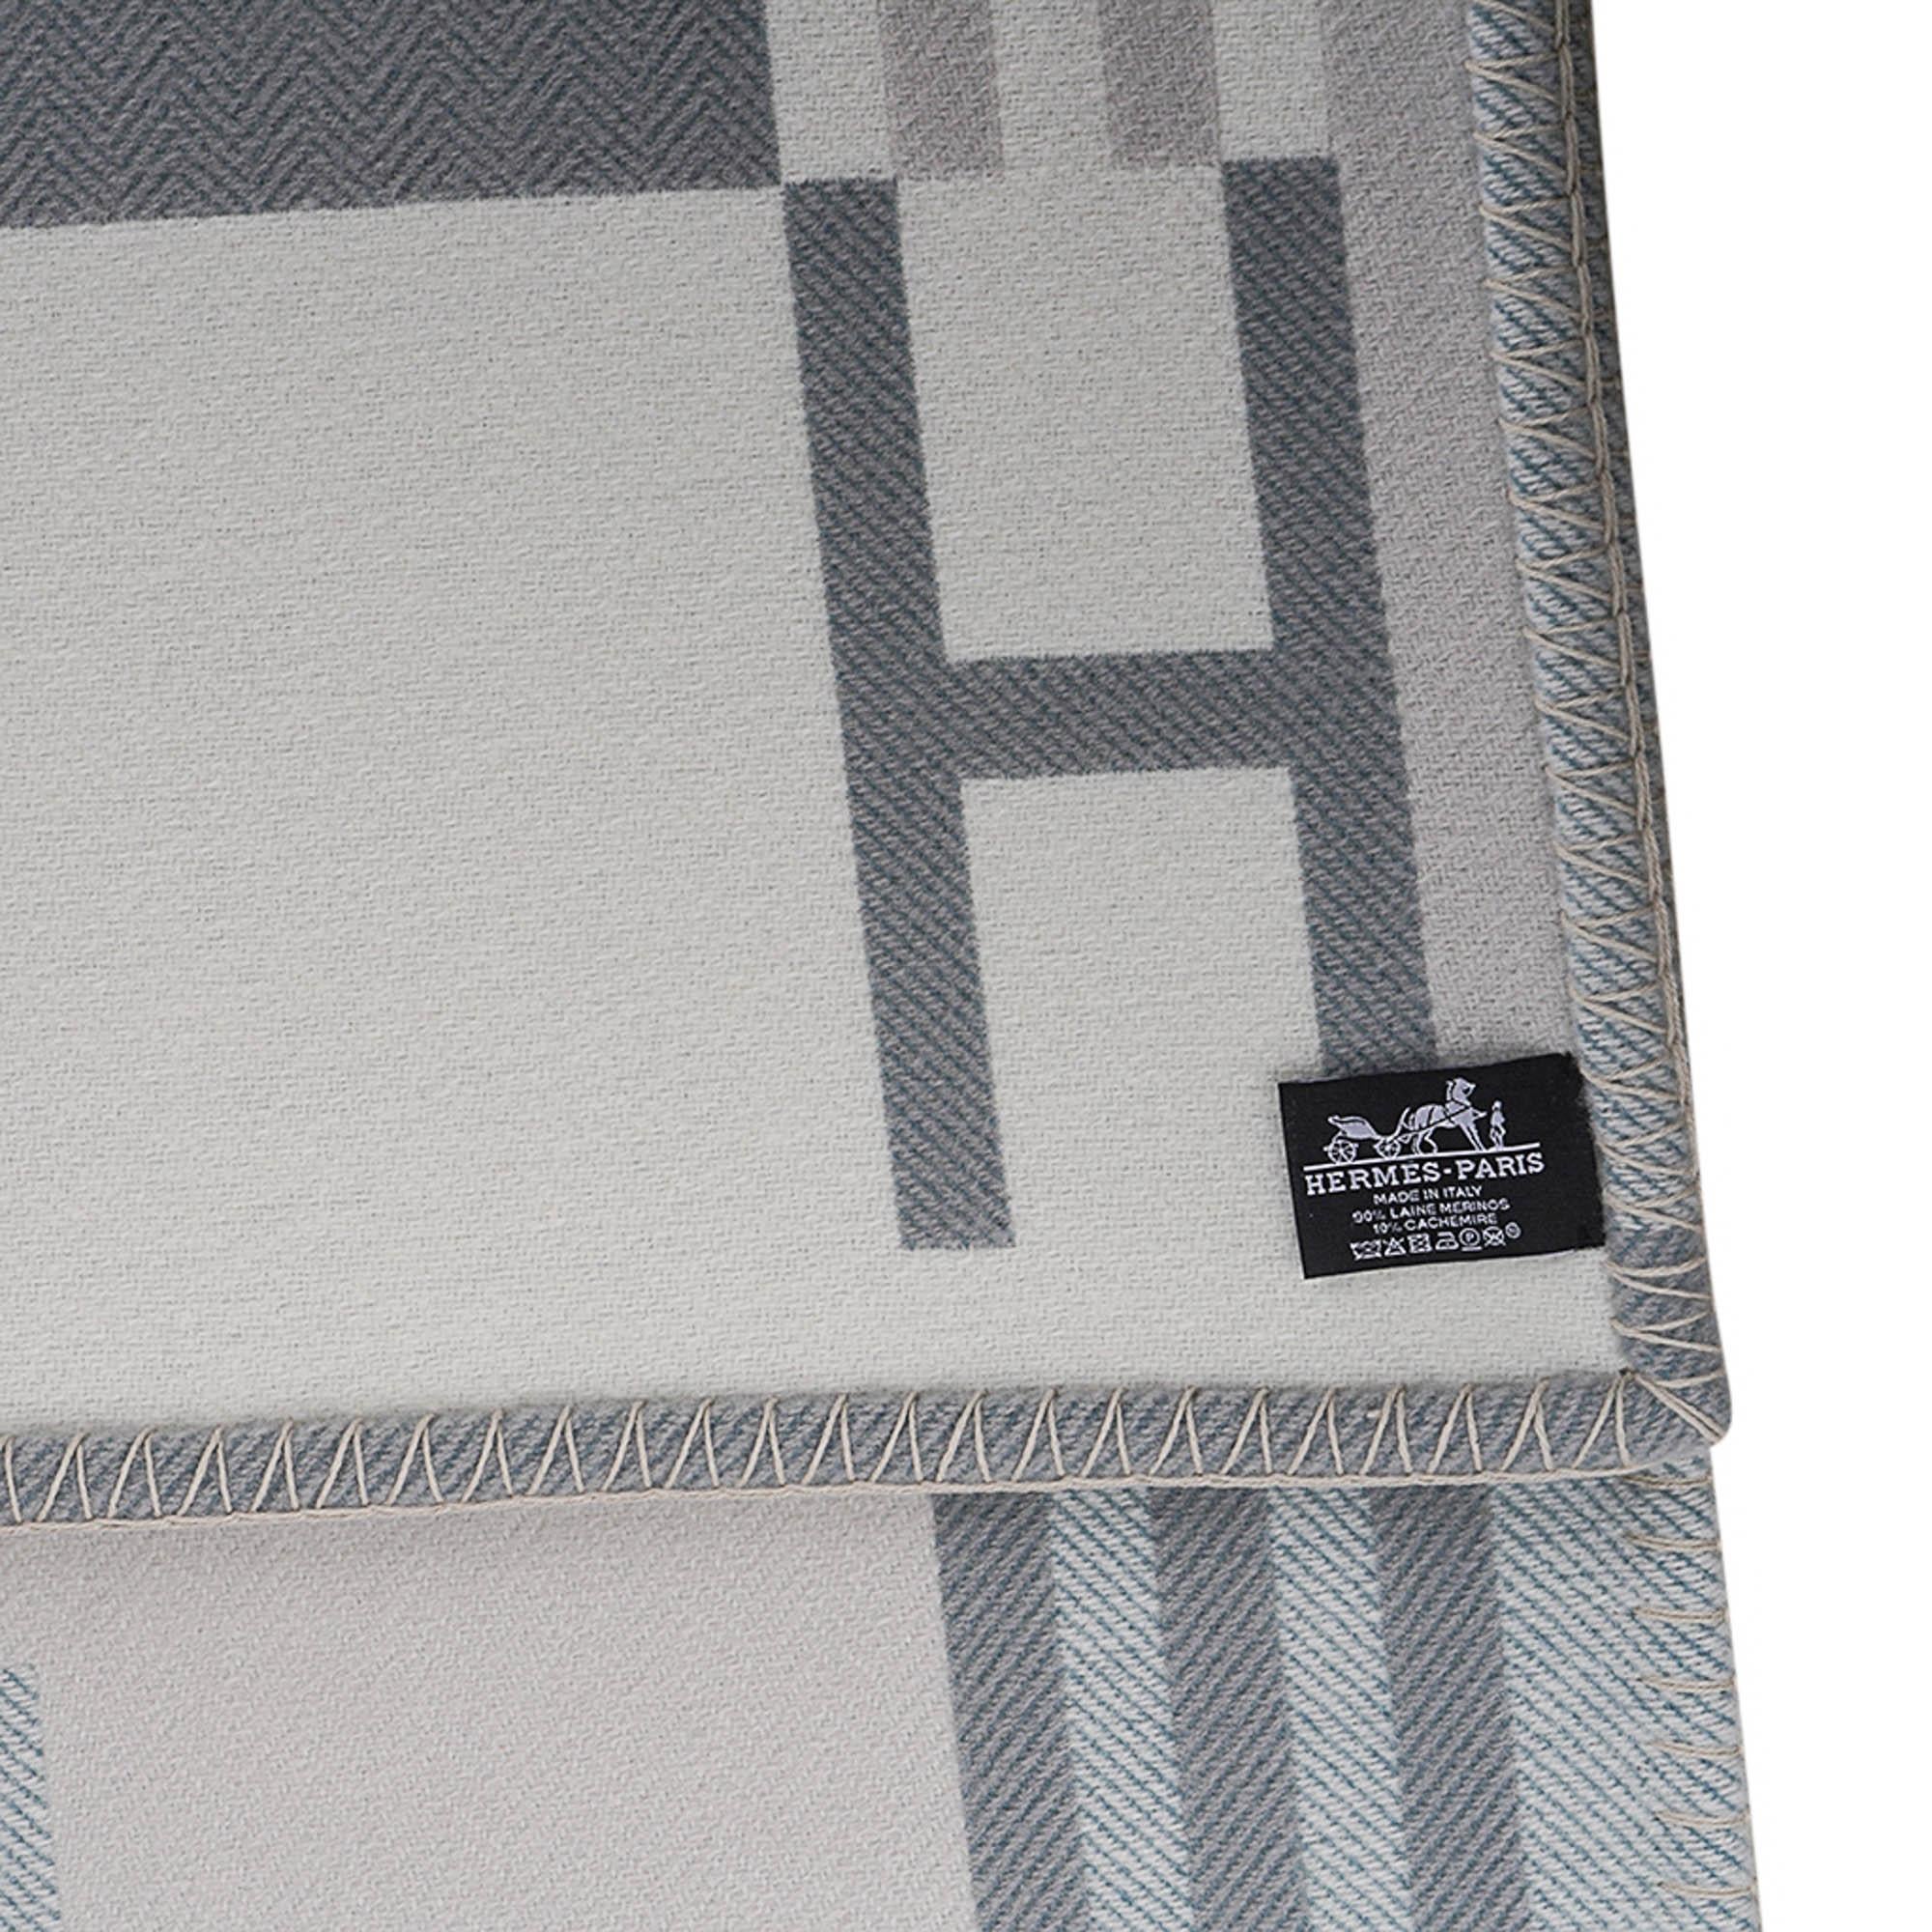 Hermes Ithaque Blanket Gris Perle Wool and Cashmere 5